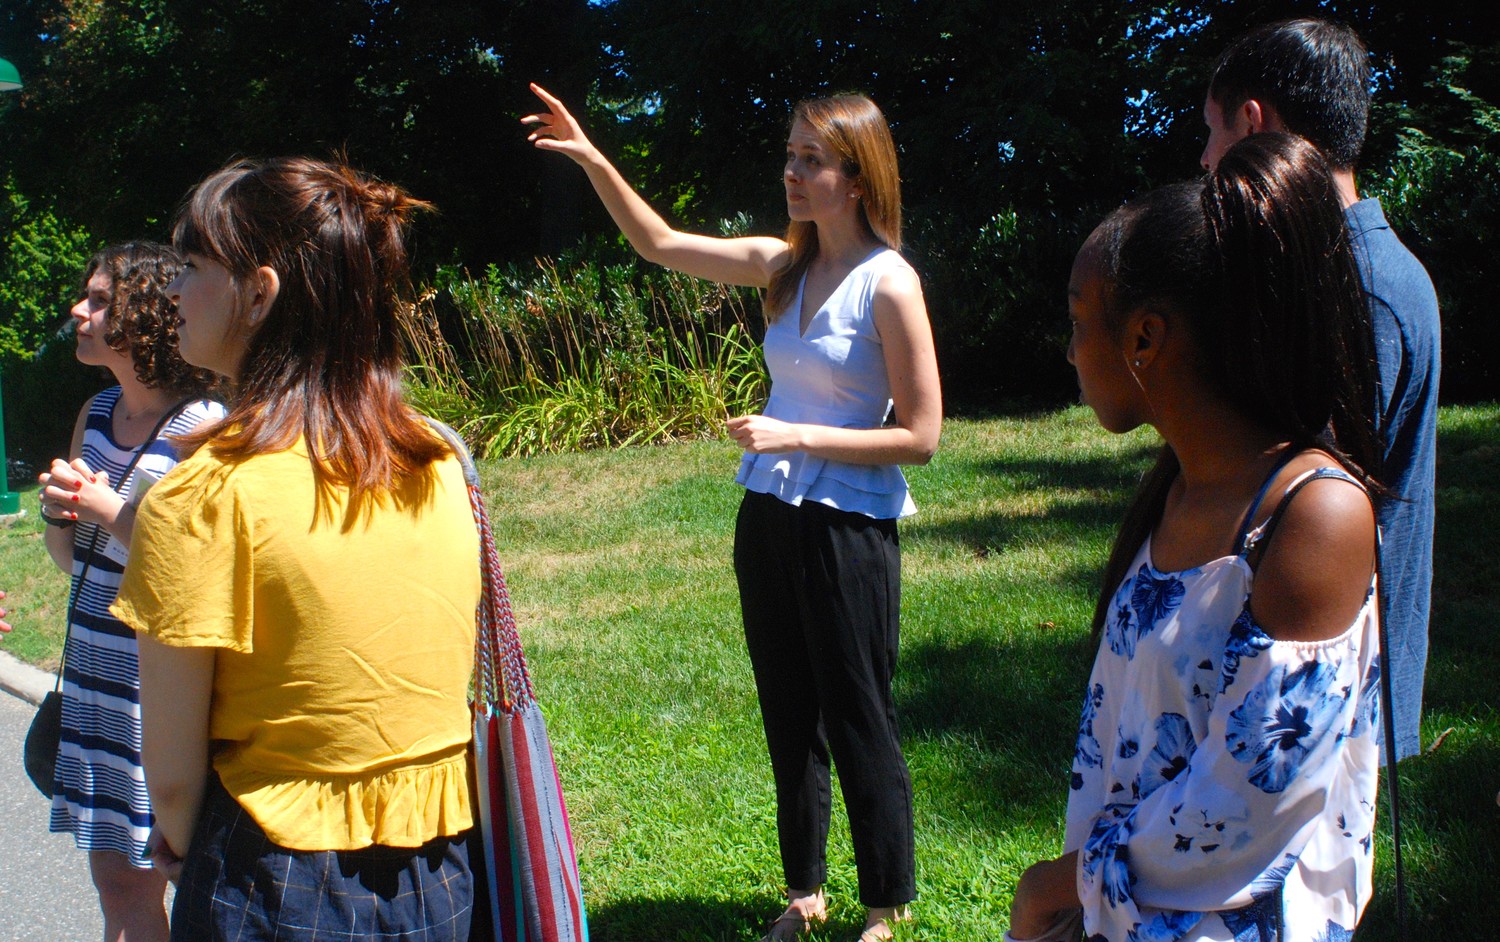 Katarina Meze, center, a doctoral student at Cold Spring Harbor Laboratory’s Watson School of Biological Sciences, recently led Herald staffers and interns on a tour of the 117-acre lab. Listening in were, from left, interns Zoe Malin, Alicia McGowan, Nia Matthews and Justin Zion.